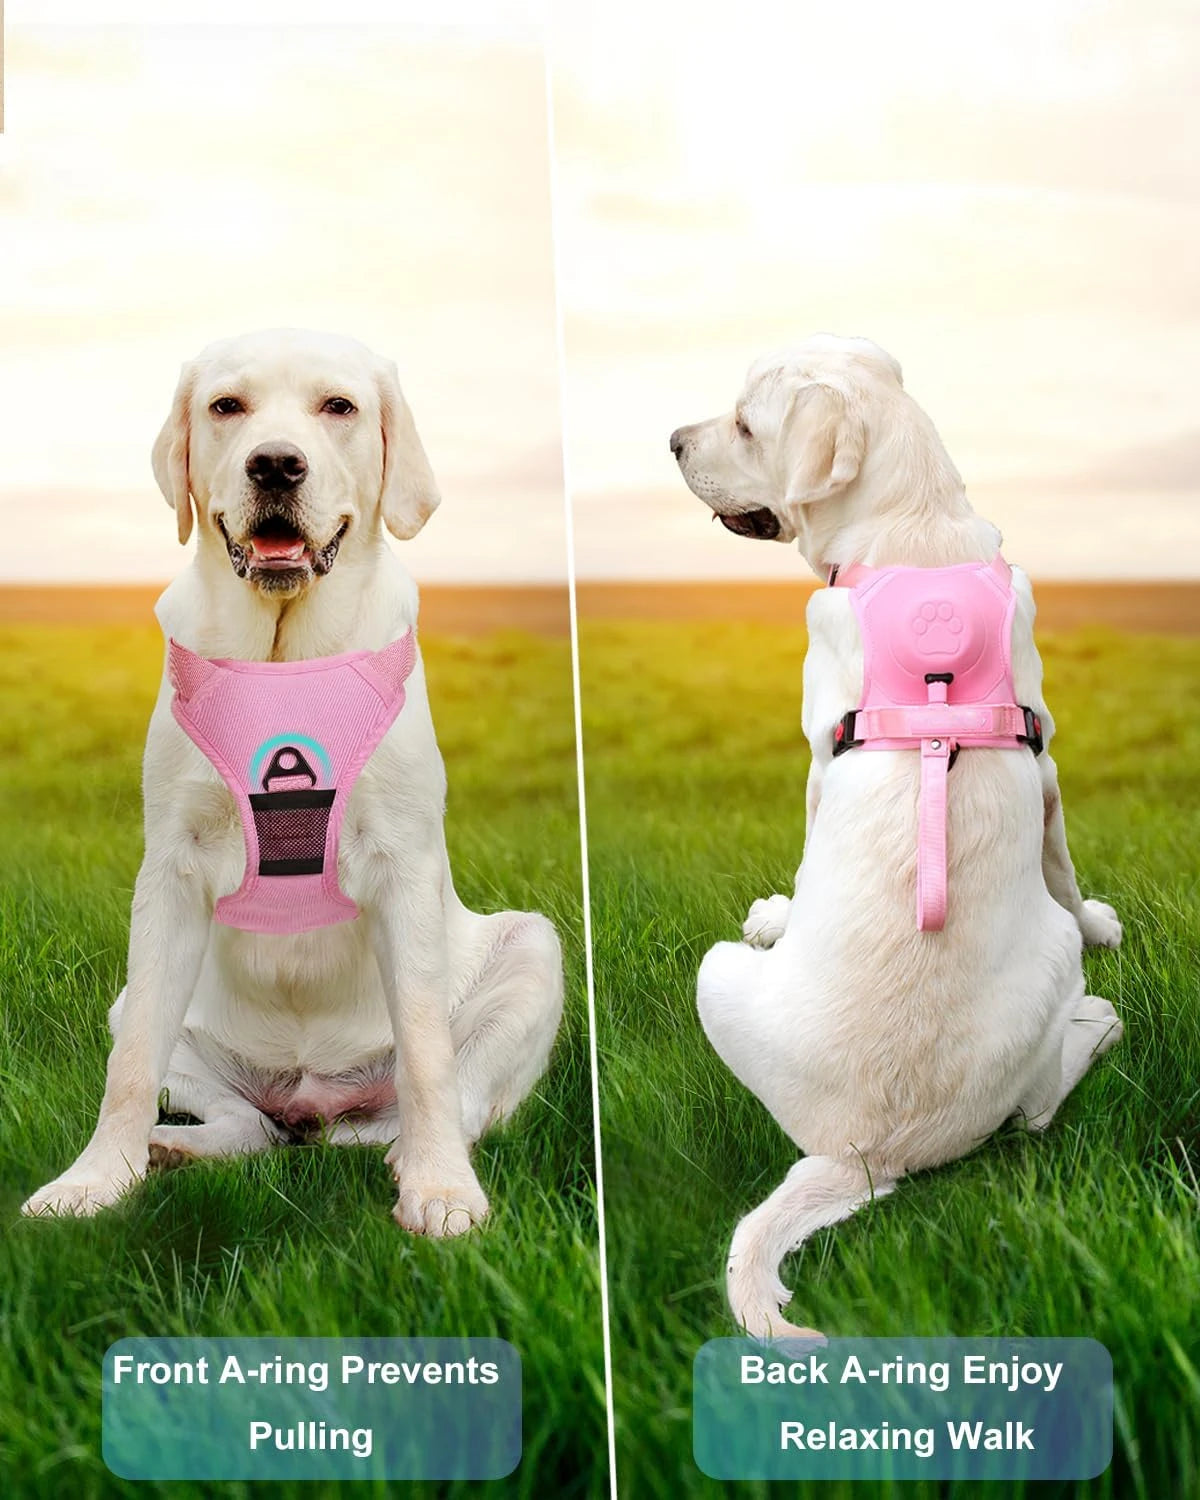 Built-in Retractable Dog Harness